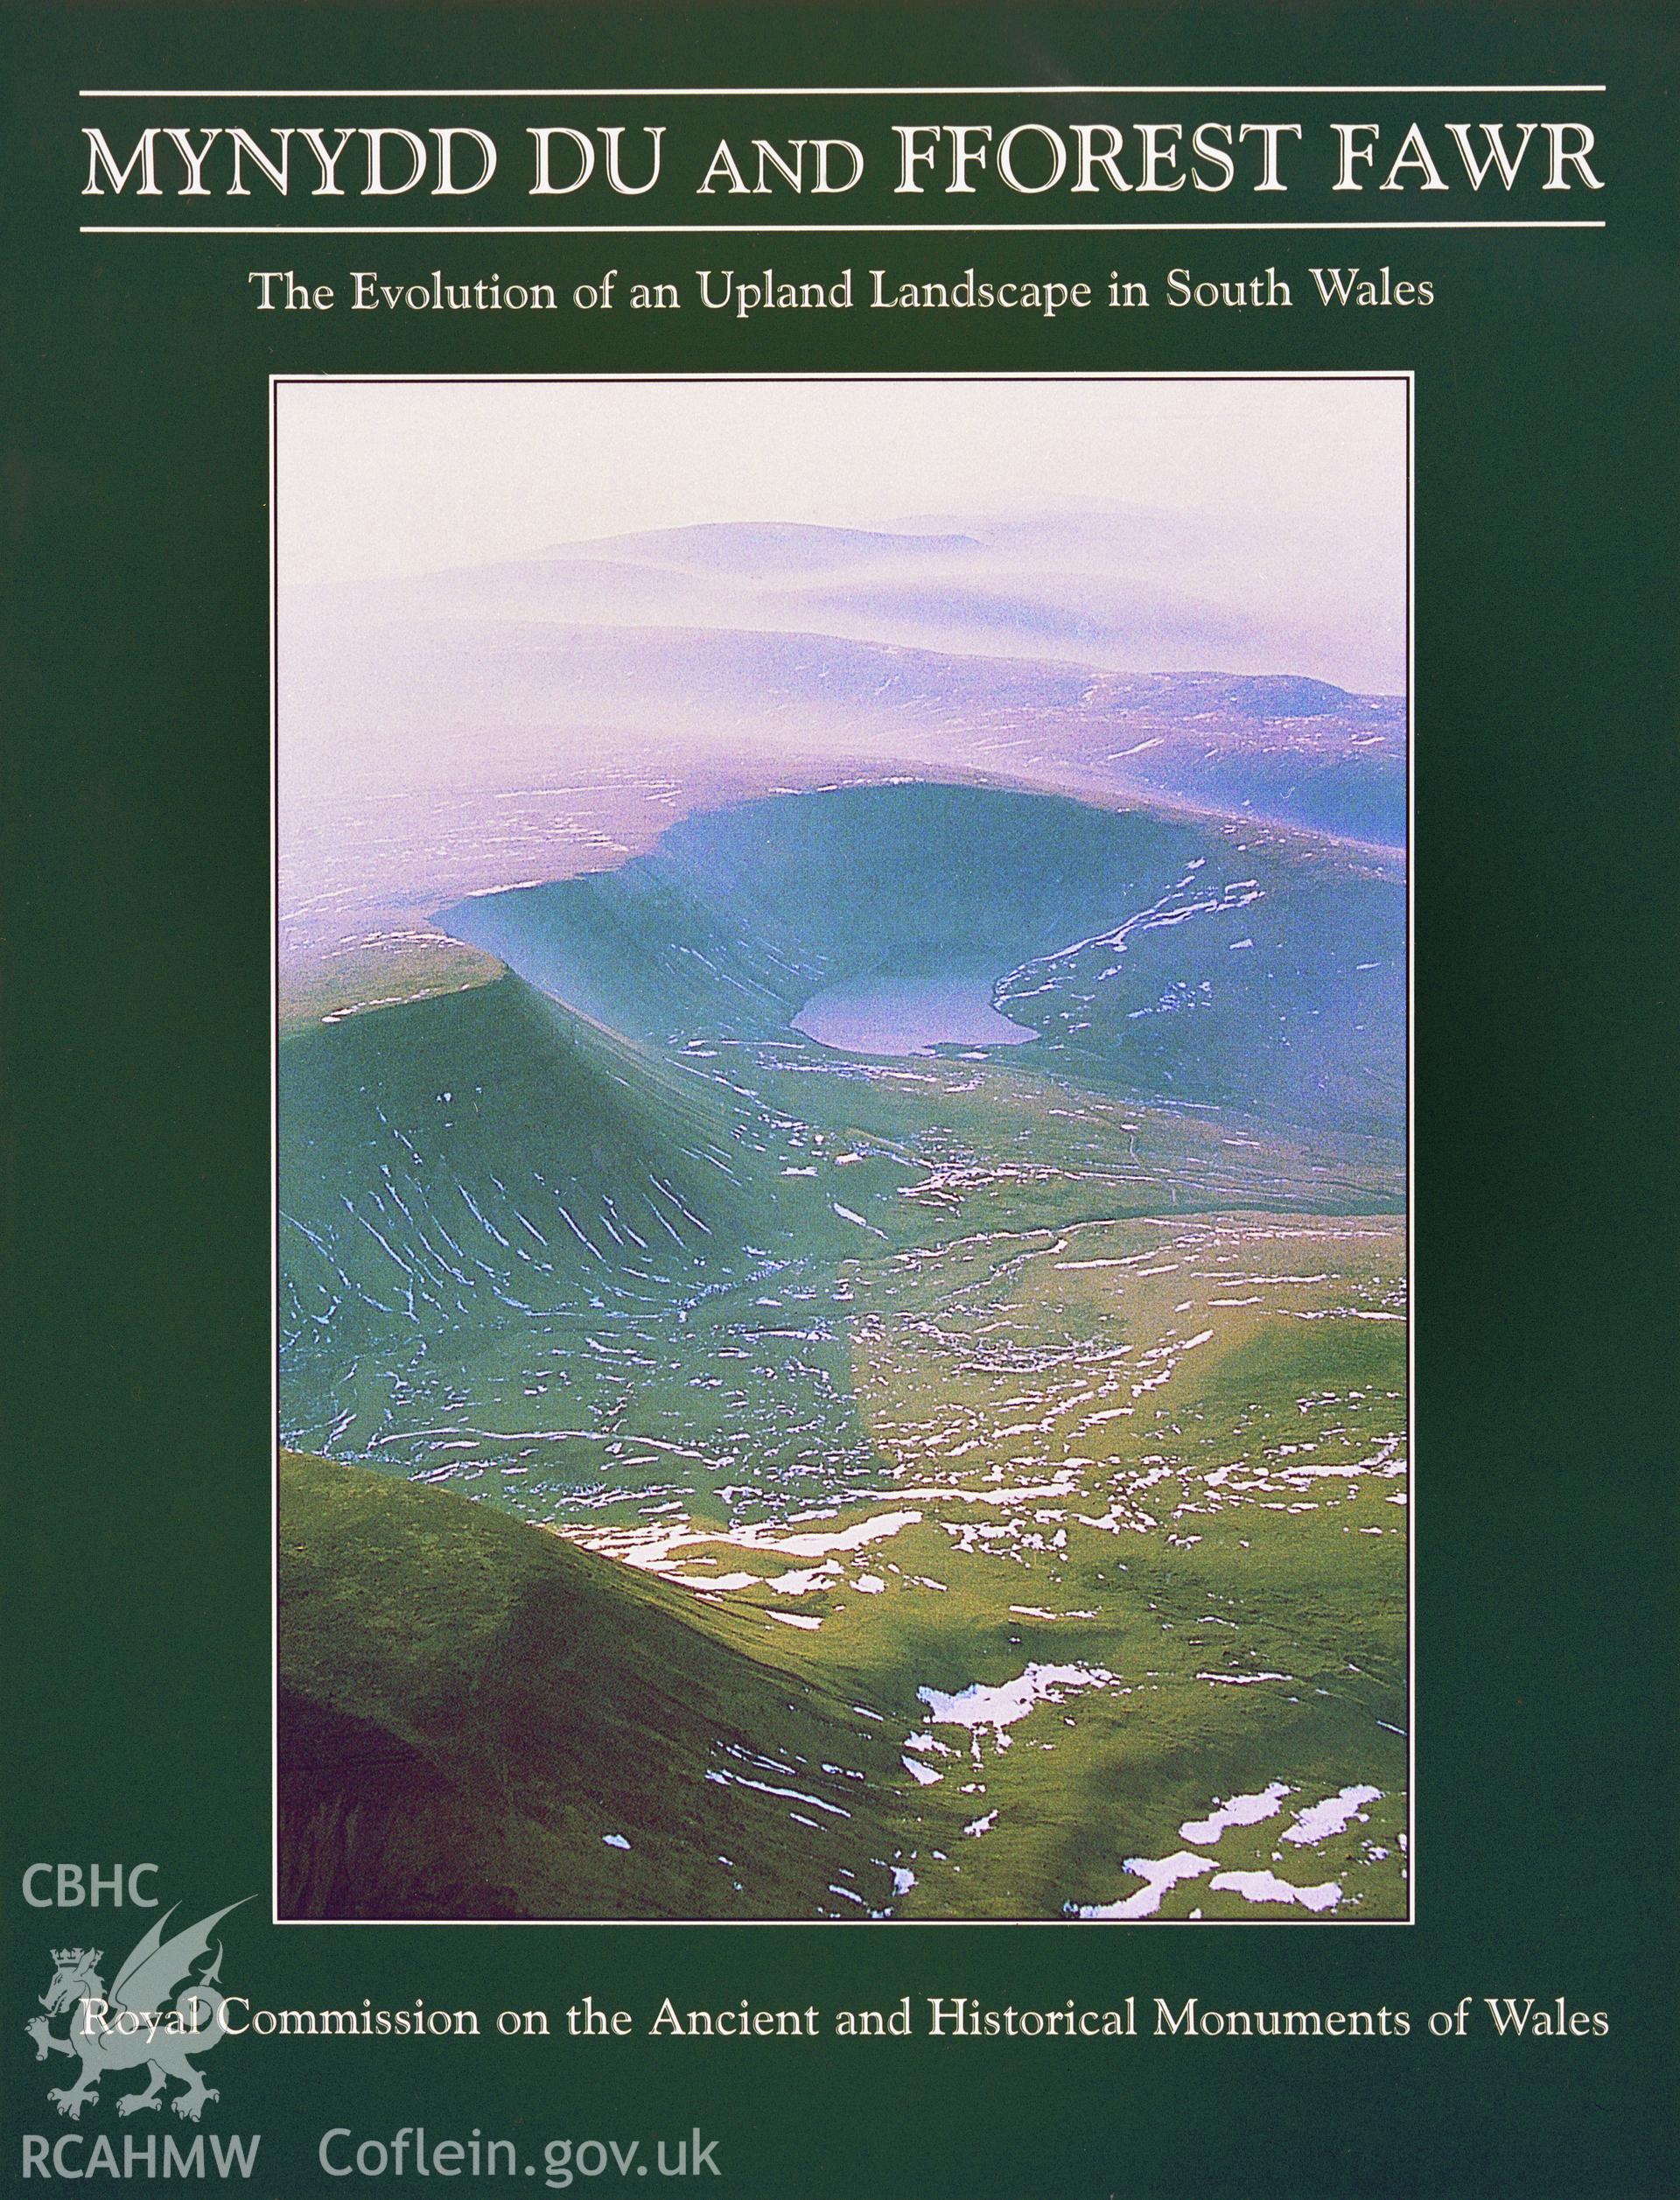 Colour transparency of the cover of the RCAHMW Publication of Mynydd Du and Fforest Fawr, The Evolution of an Upland Landscape in South Wales.